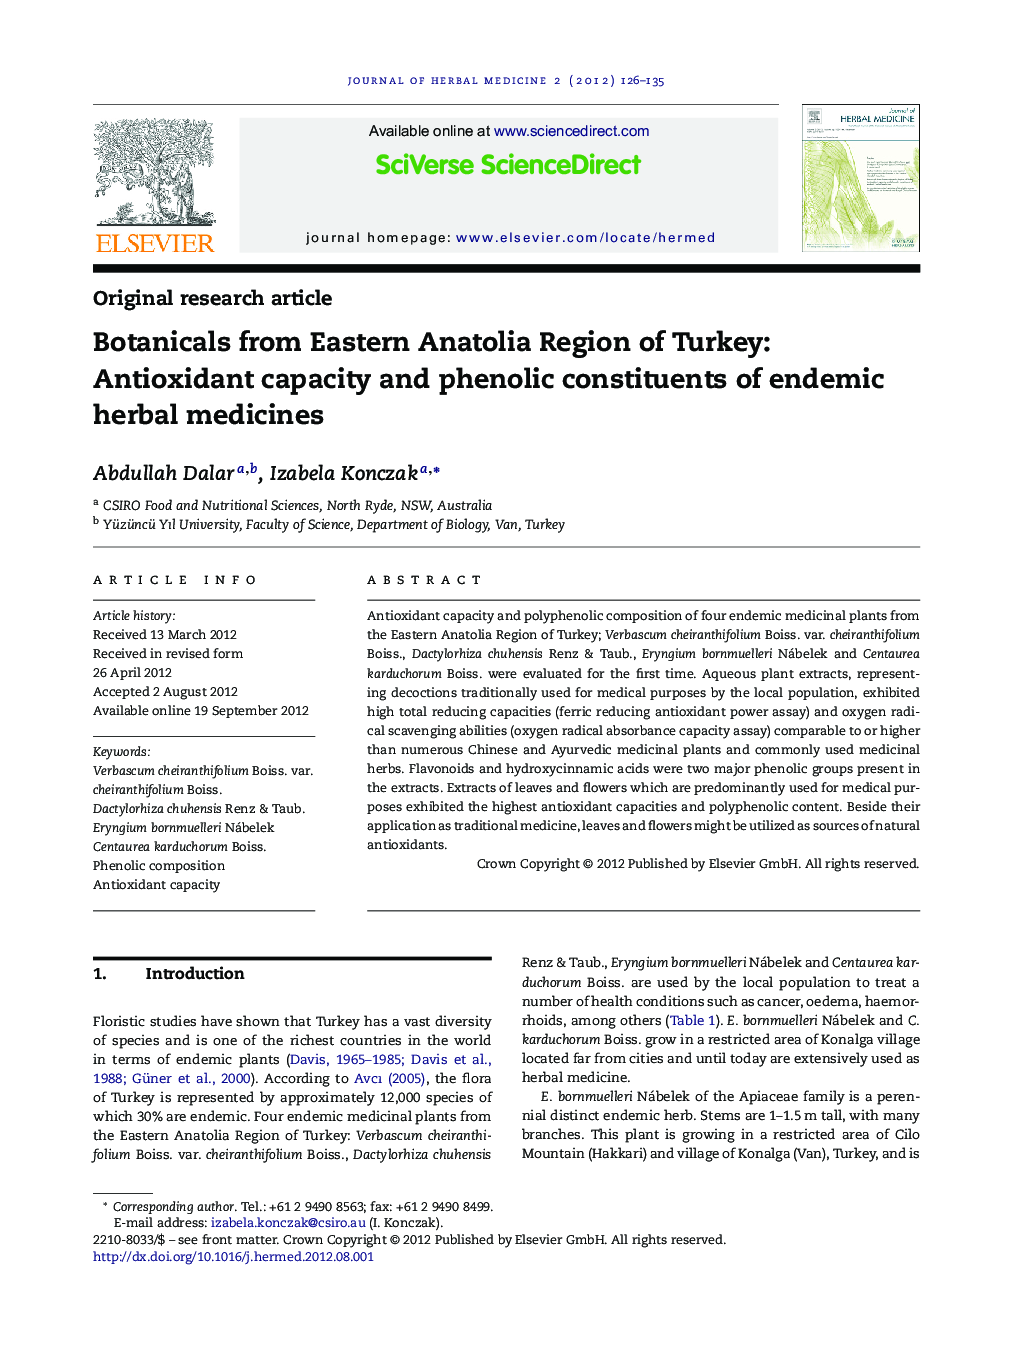 Botanicals from Eastern Anatolia Region of Turkey: Antioxidant capacity and phenolic constituents of endemic herbal medicines